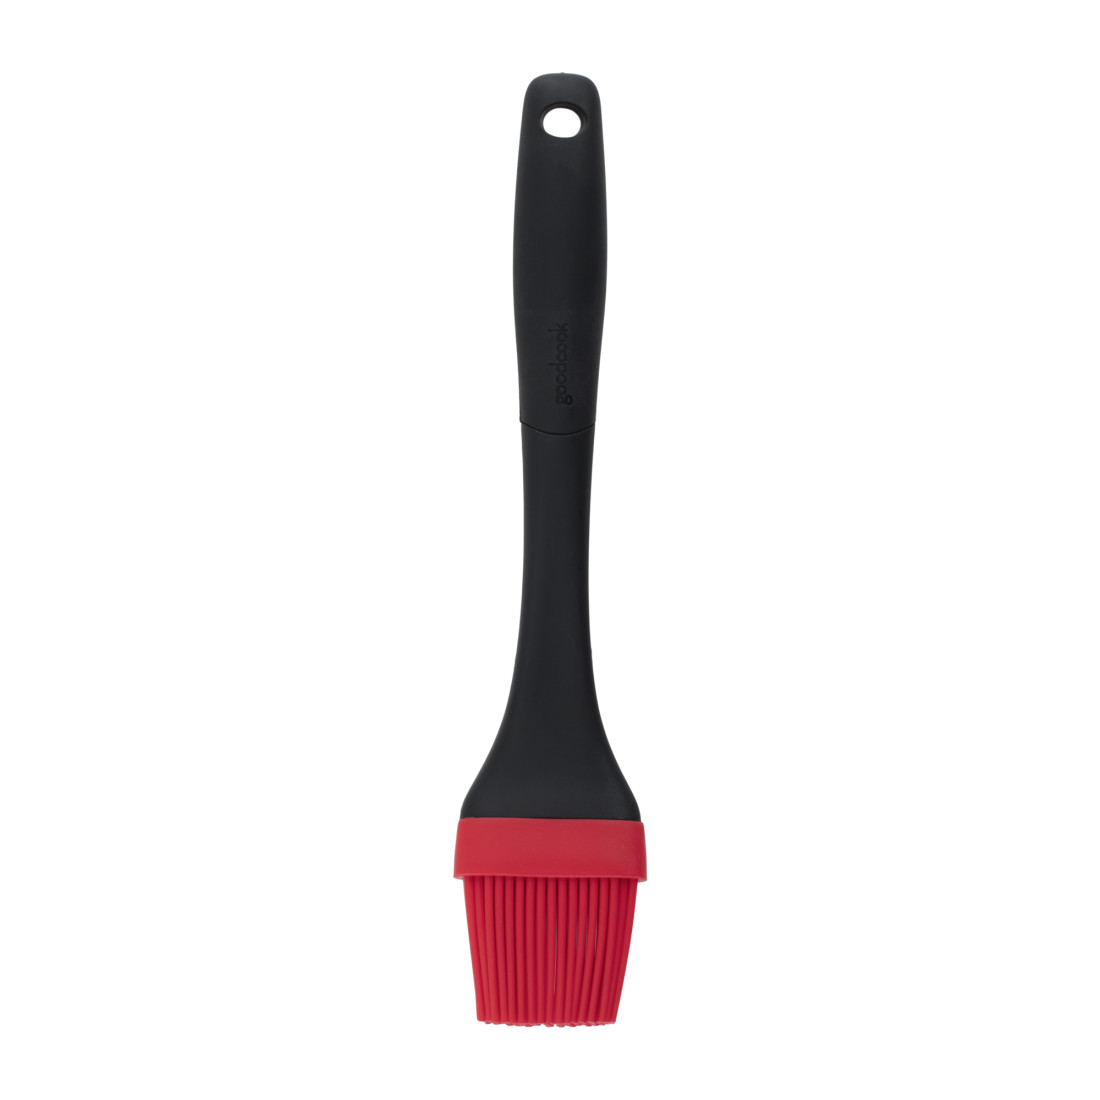 Easy Clean Silicone Basting Brush Accessory